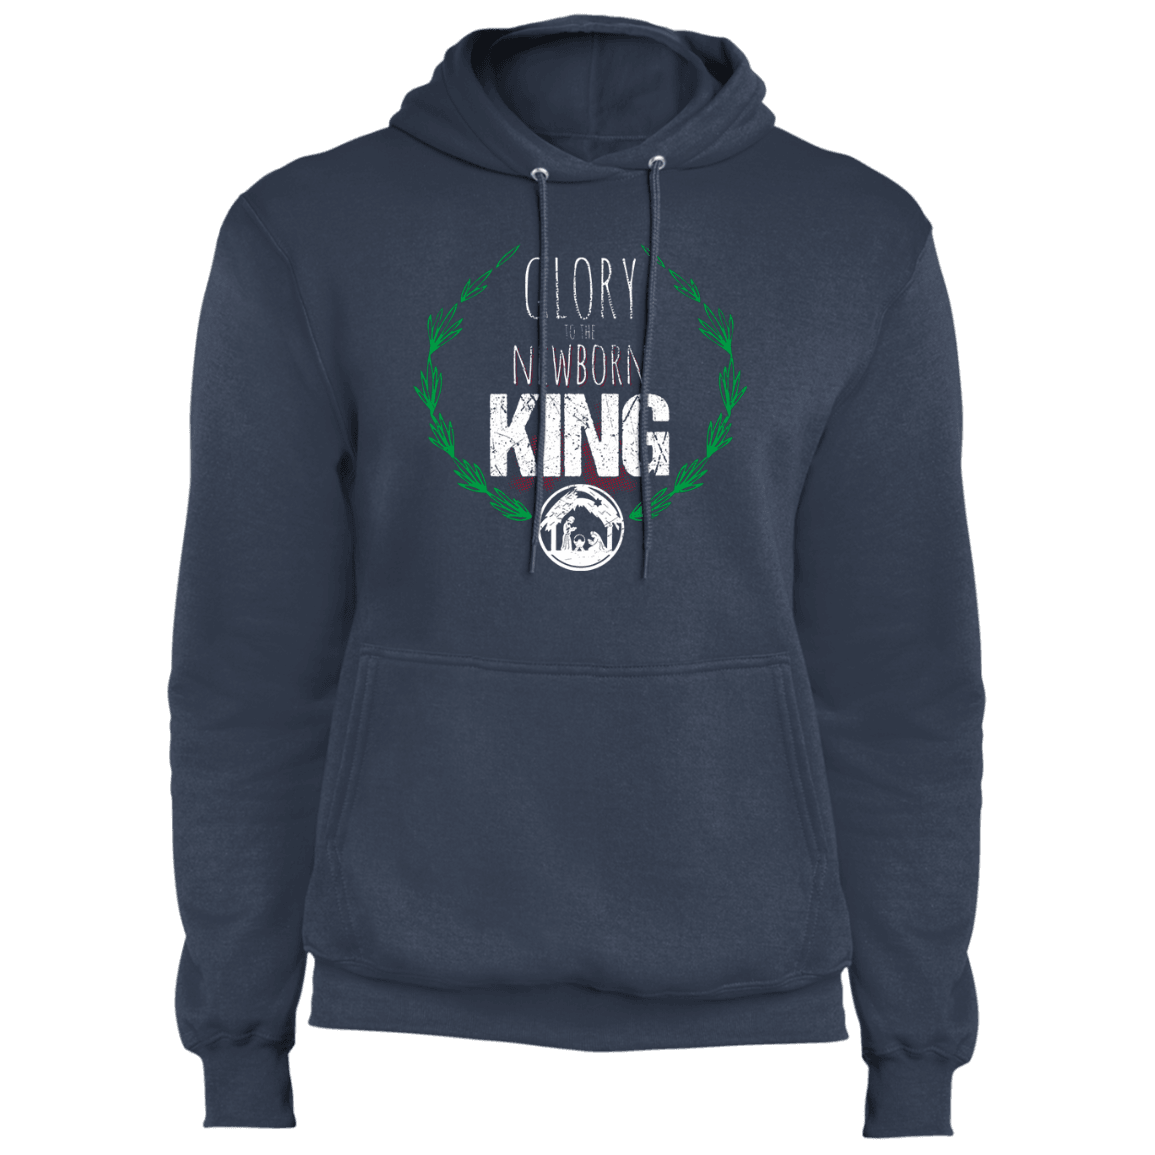 Designs by MyUtopia Shout Out:Glory to the Newborn King - Core Fleece Unisex Pullover Hoodie,Navy / S,Sweatshirts